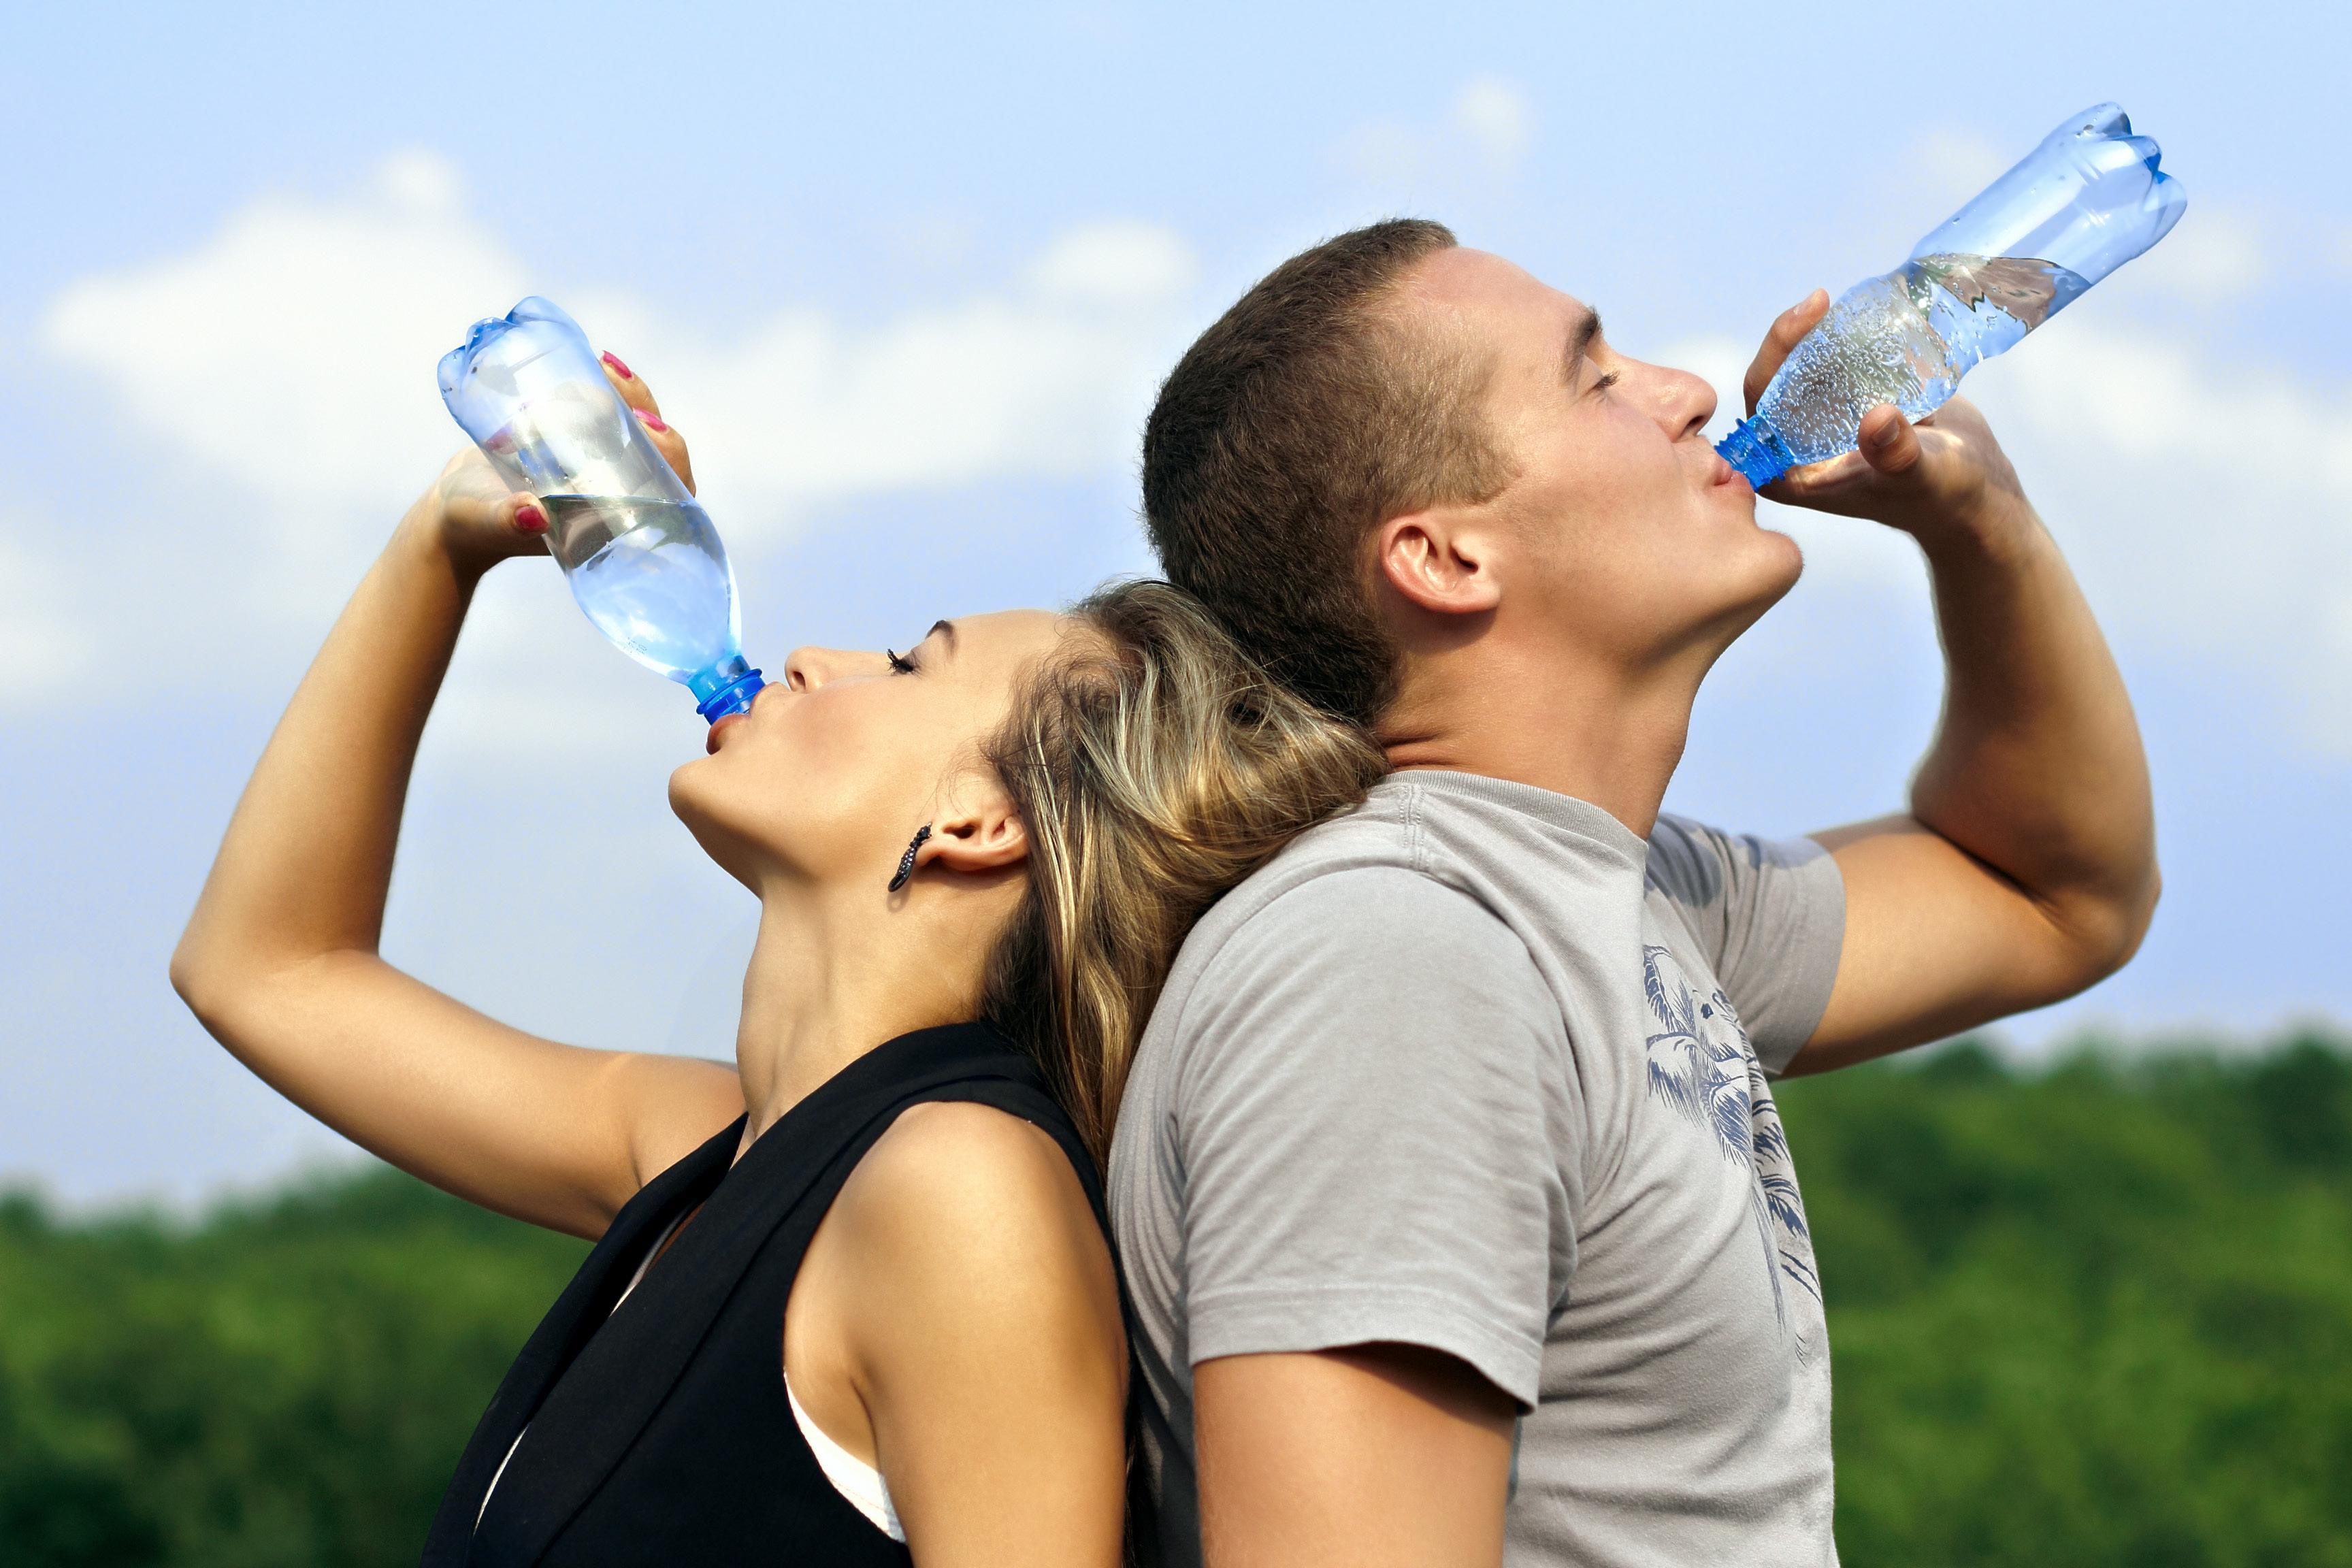 Drinking too much water can be harmful